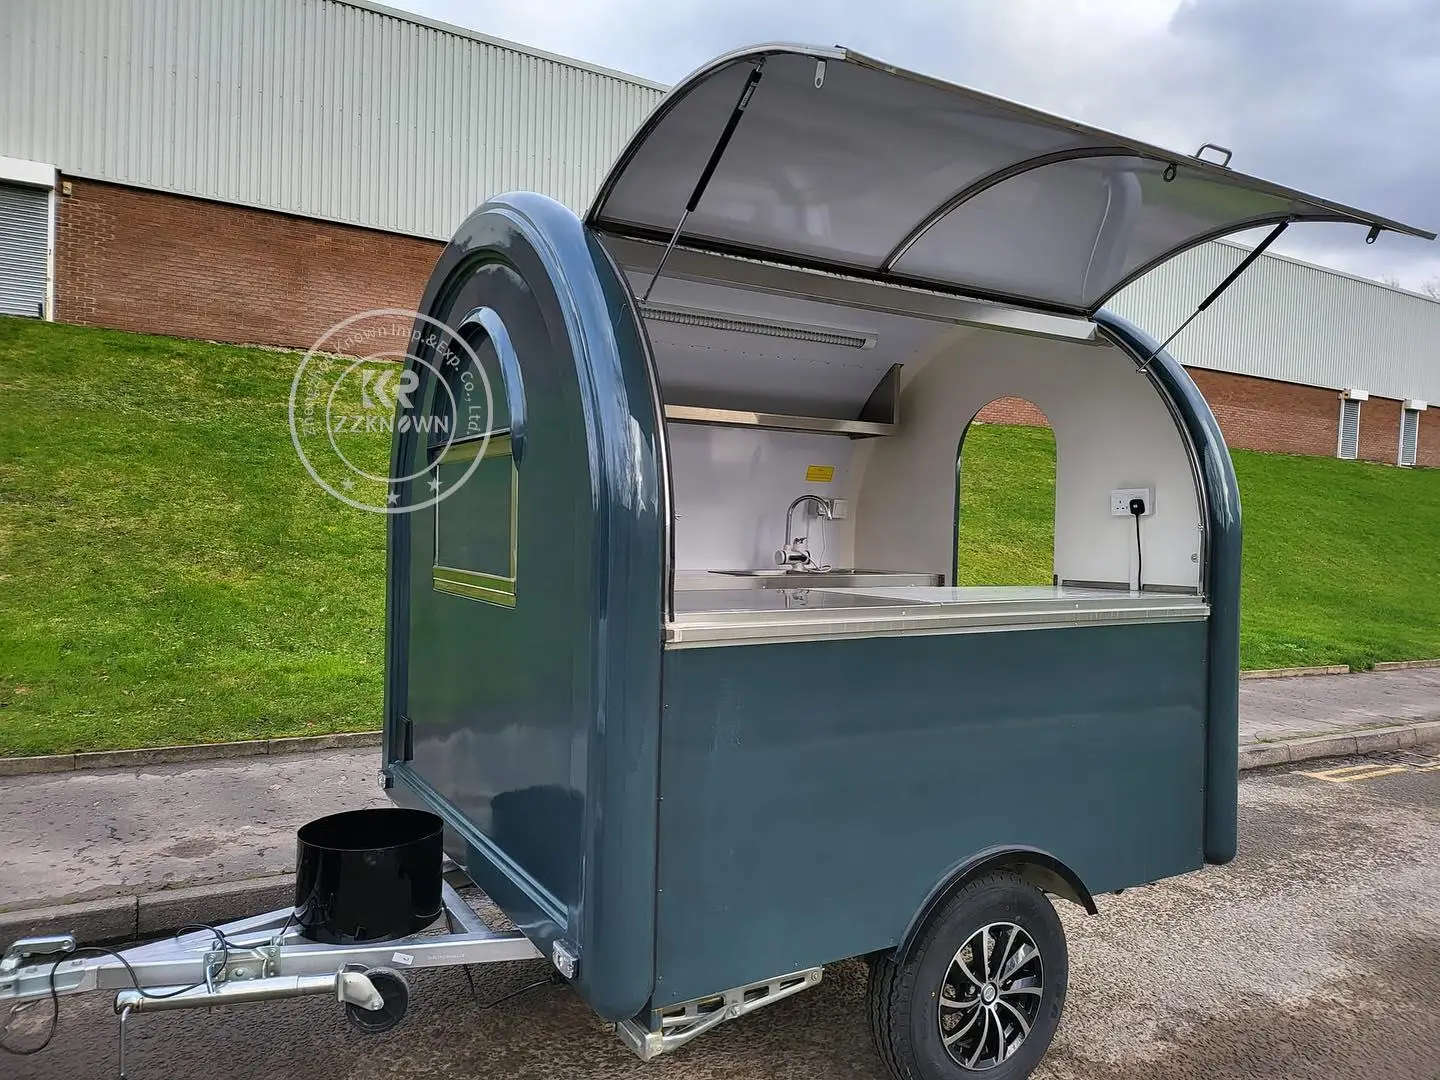 Mobile Food Truck With Full Kitchen Concession Food Trailer Hot Dog Ice Cream Cart With Full Kitchen Us Standards DOT Pizza kitchen sink strainer stainless steel mesh sink filter anti clog strainer with deodorant cover bathroom sink basket strainer